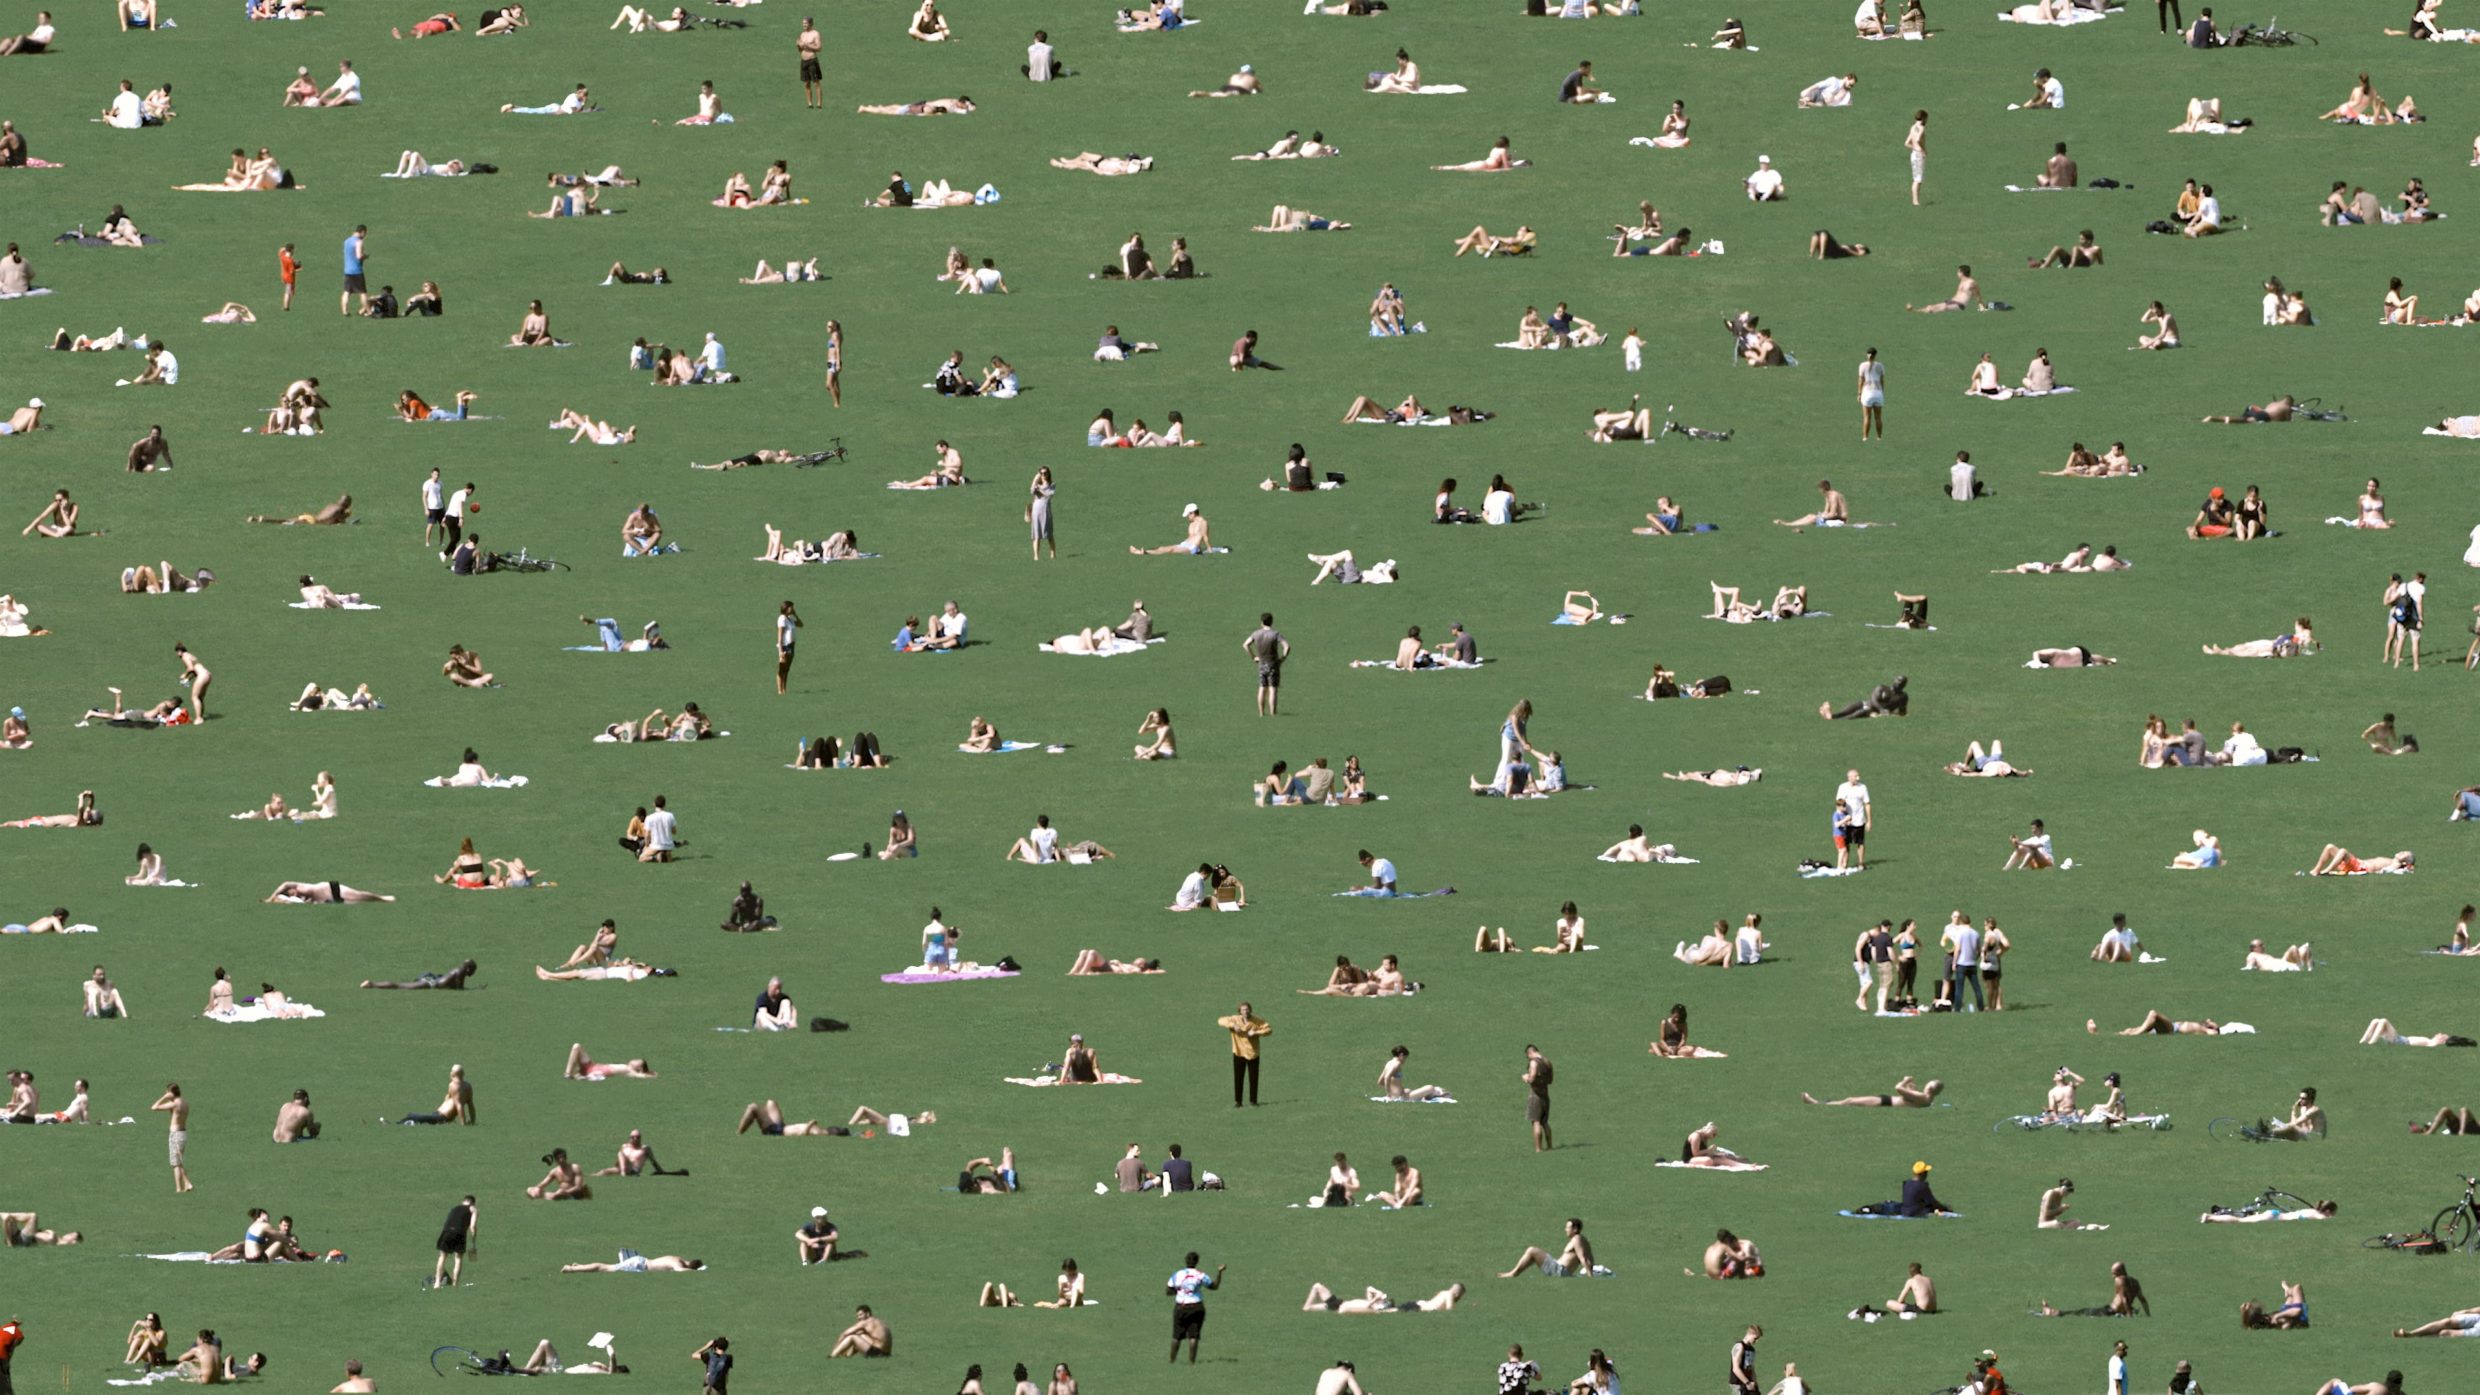 a still from "17 small ideas" by andrew myers. shot of green park, people sitting in the park equidistant from each other.